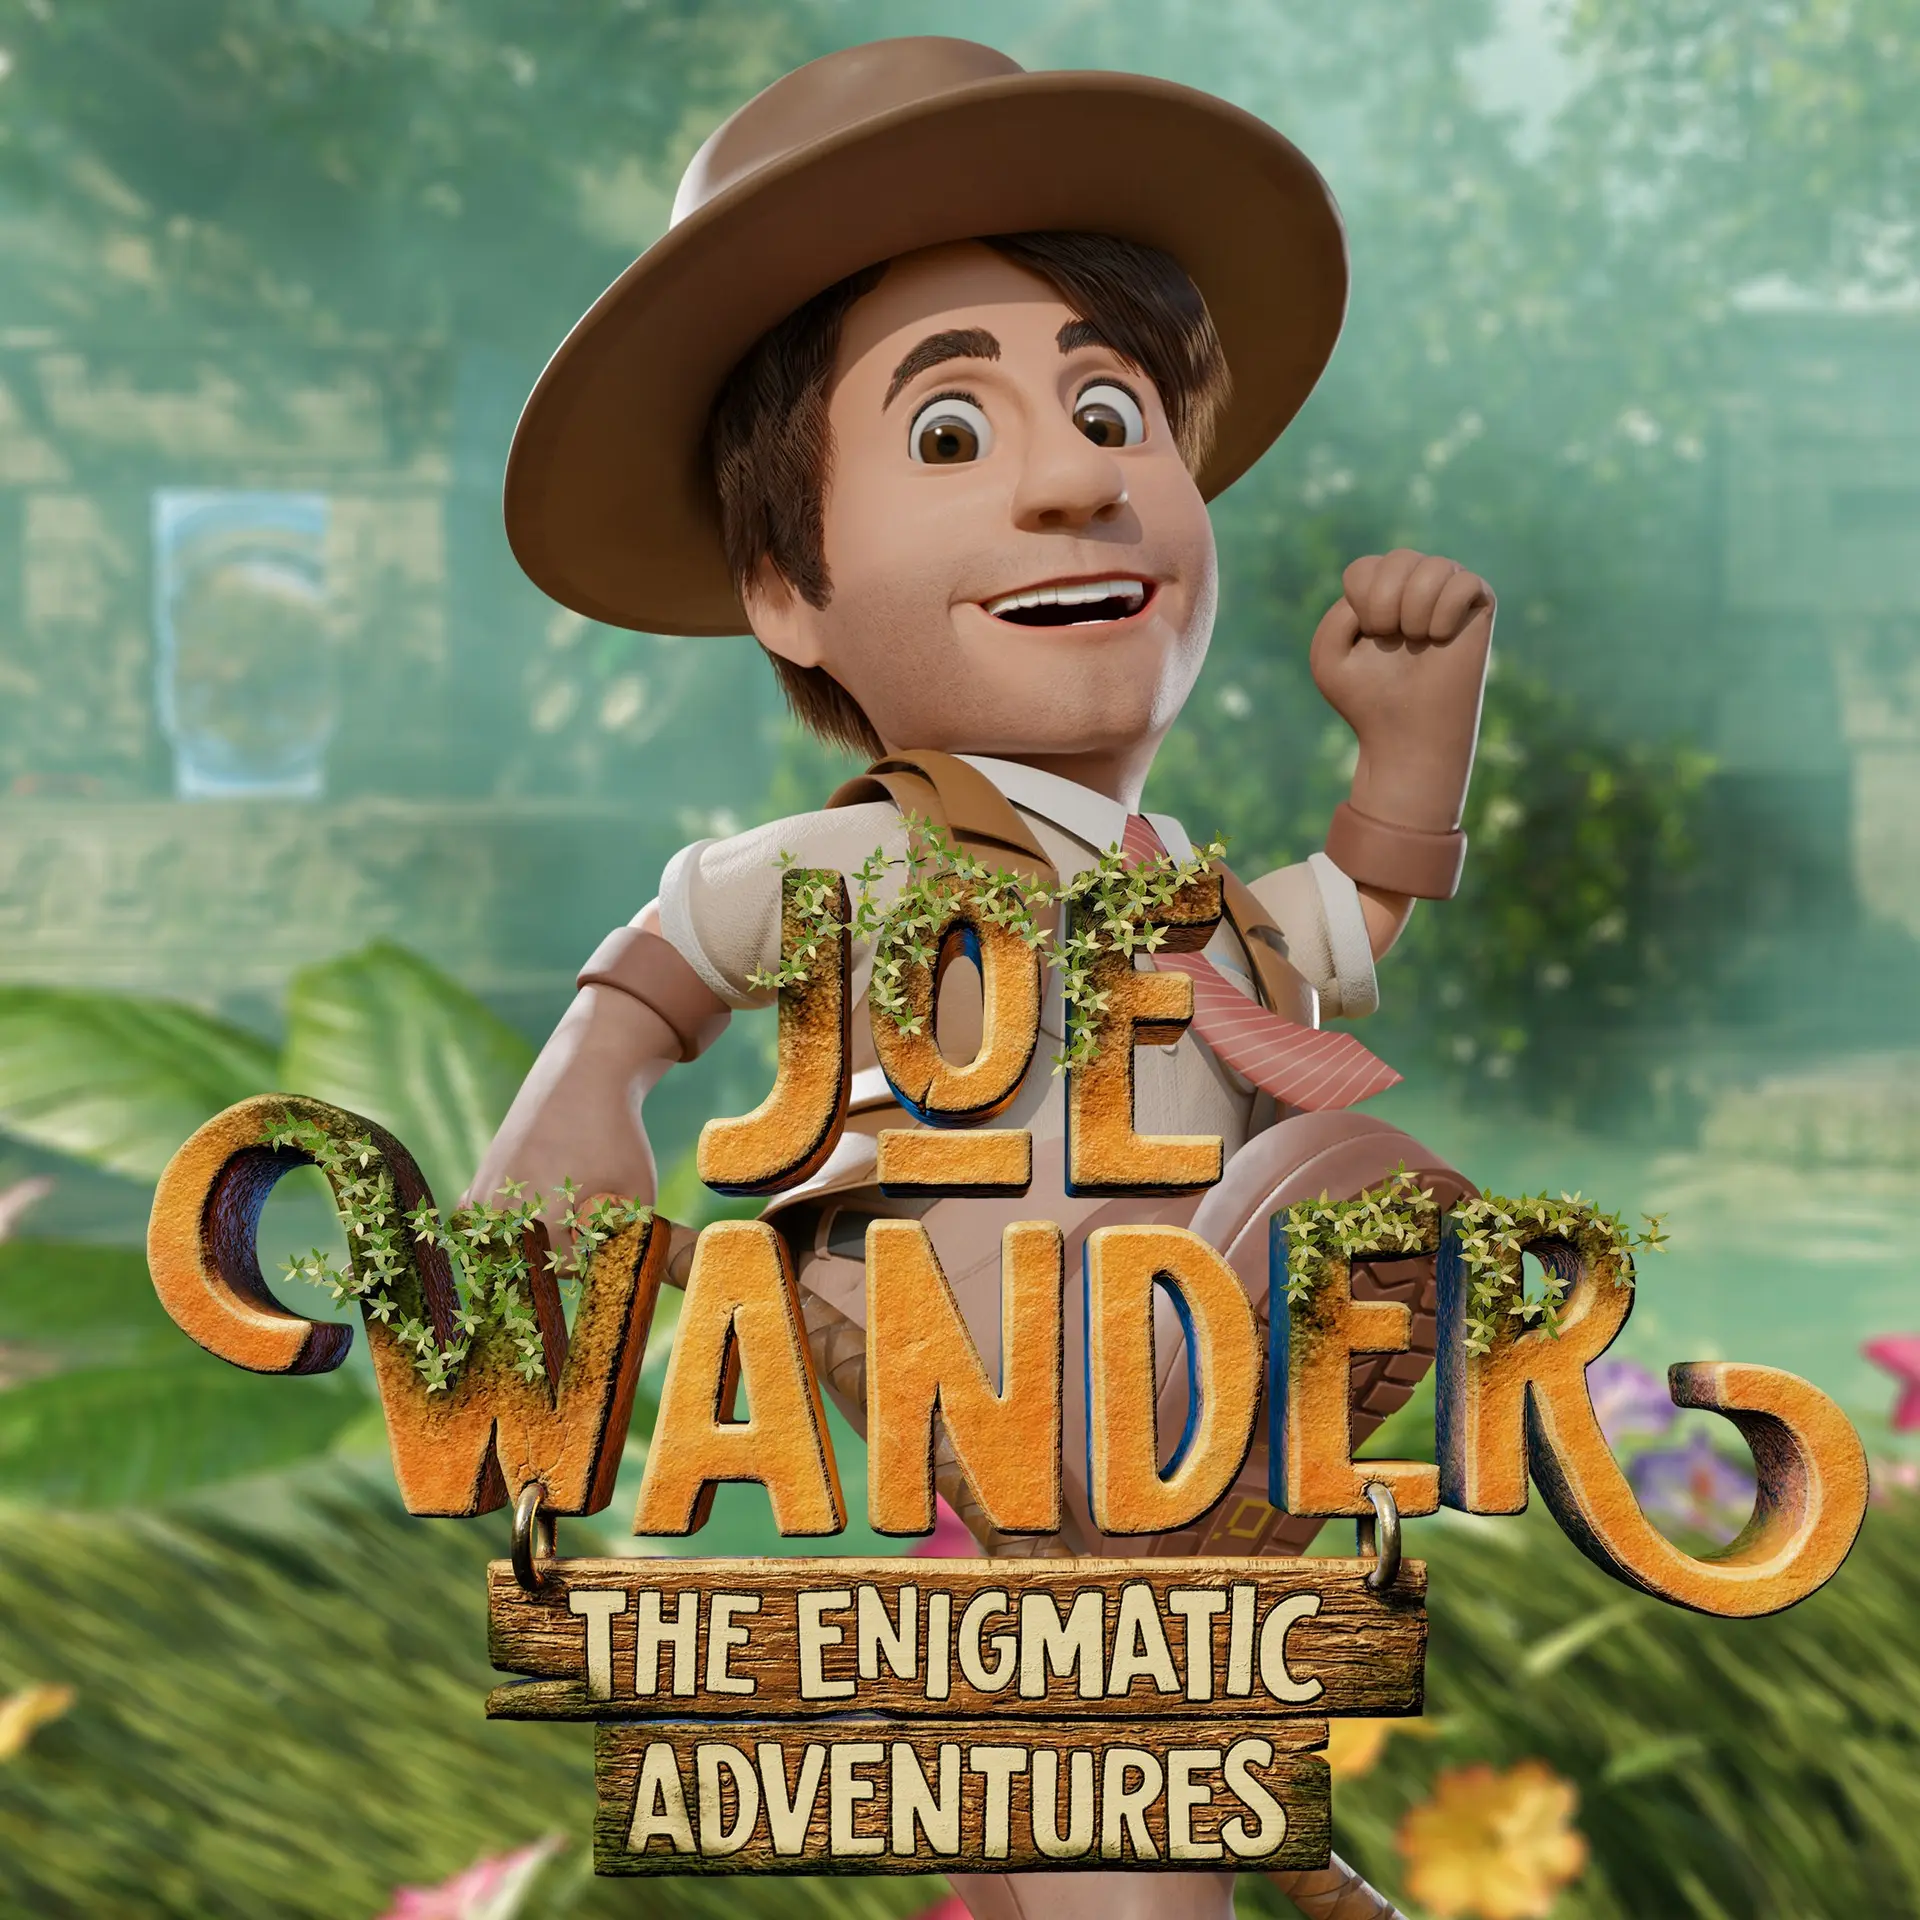 Joe Wander and the Enigmatic adventures (Xbox Games BR)